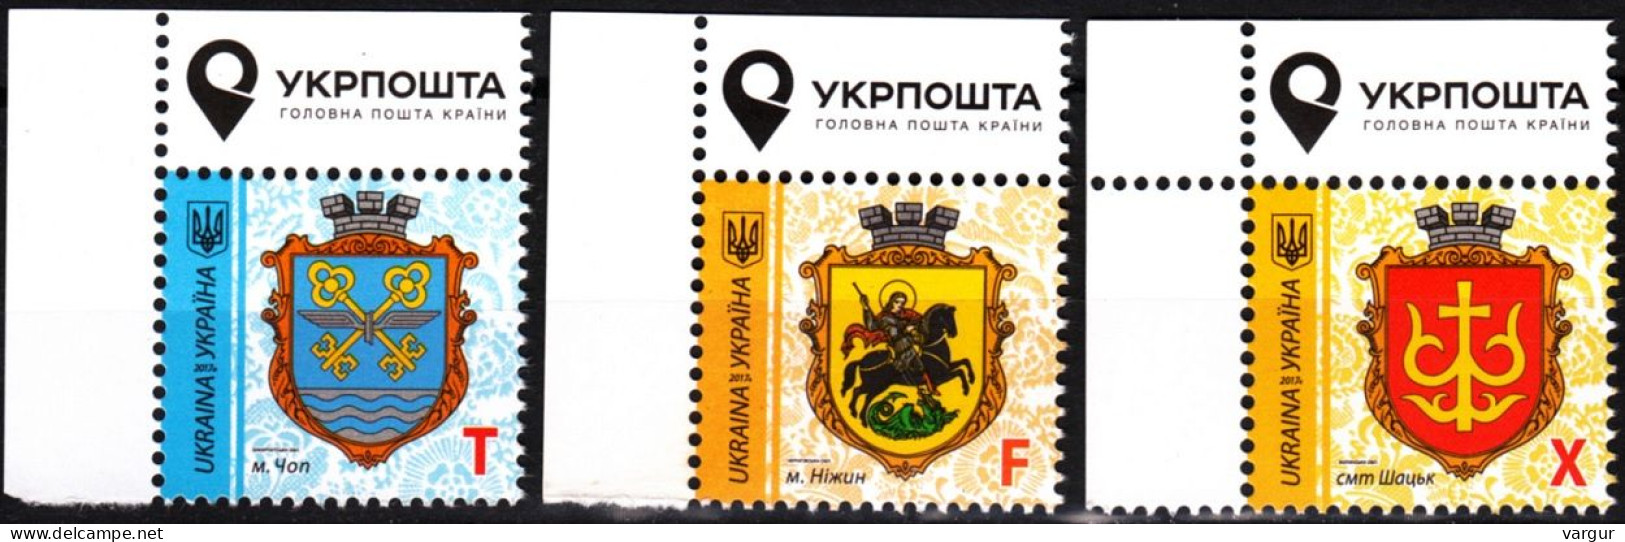 UKRAINE 2017 Definitive: Heraldry. Town Arms. Reprints. Issues #6-7, 3v. UL Corner, MNH - Stamps